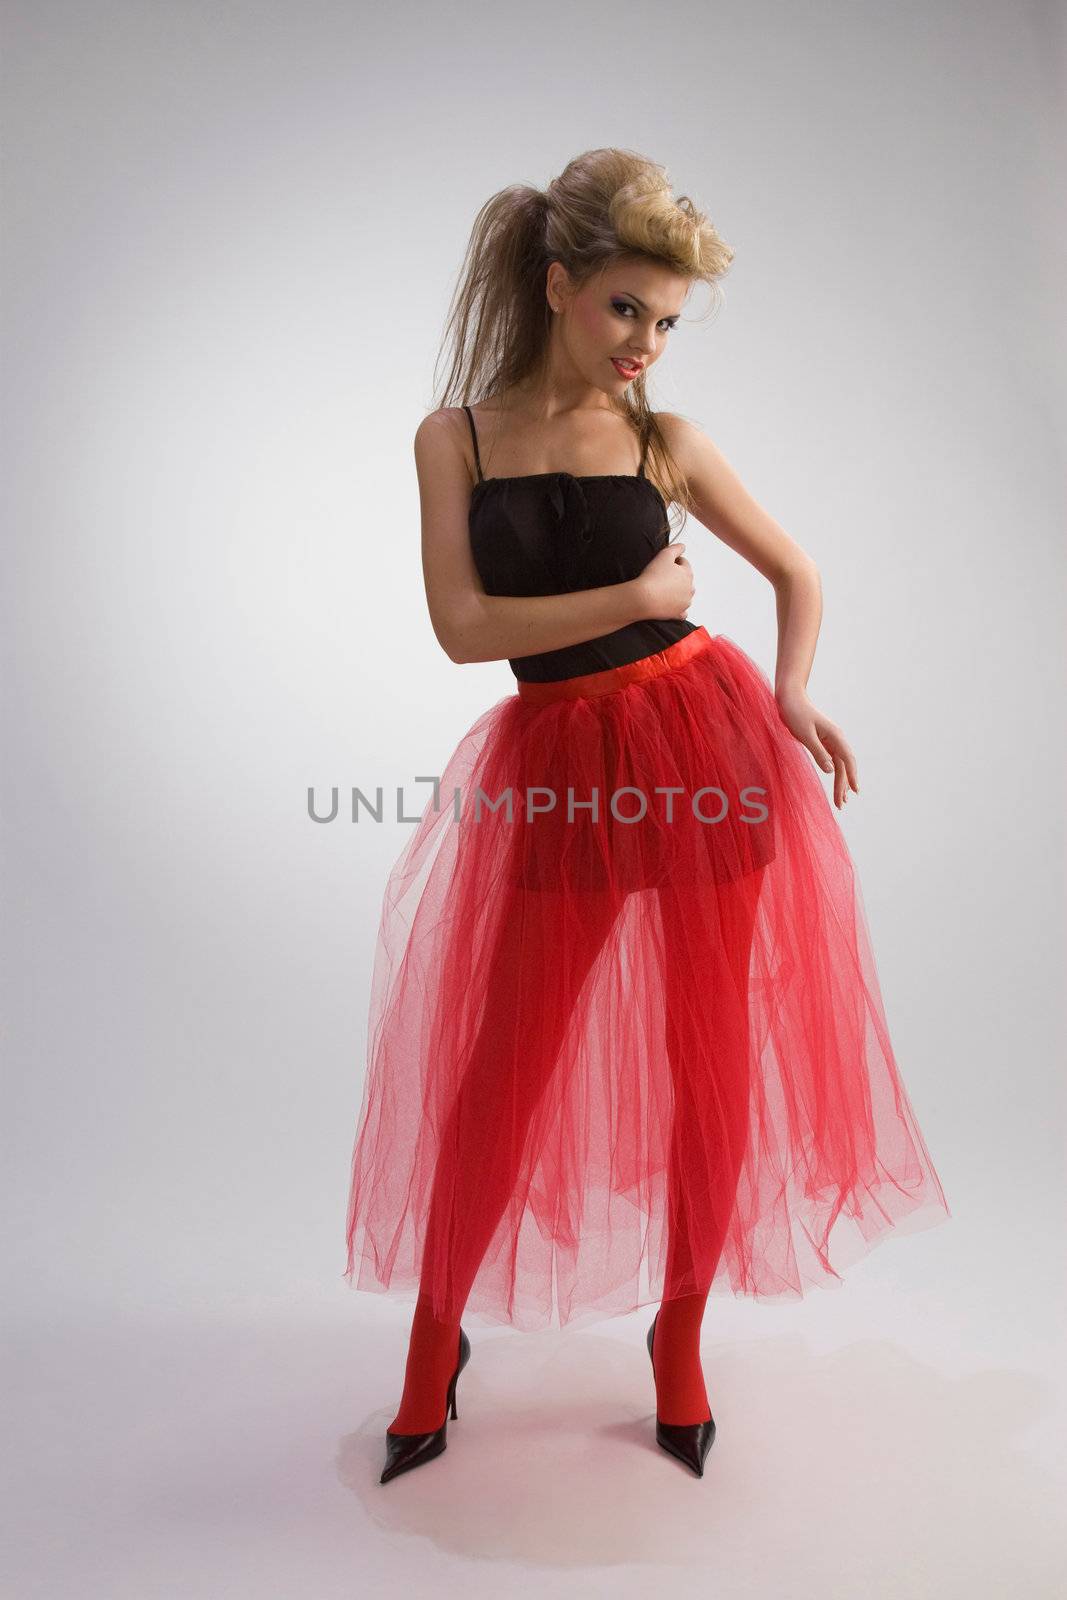 Beautiful woman in red diaphanous skirt on grey background